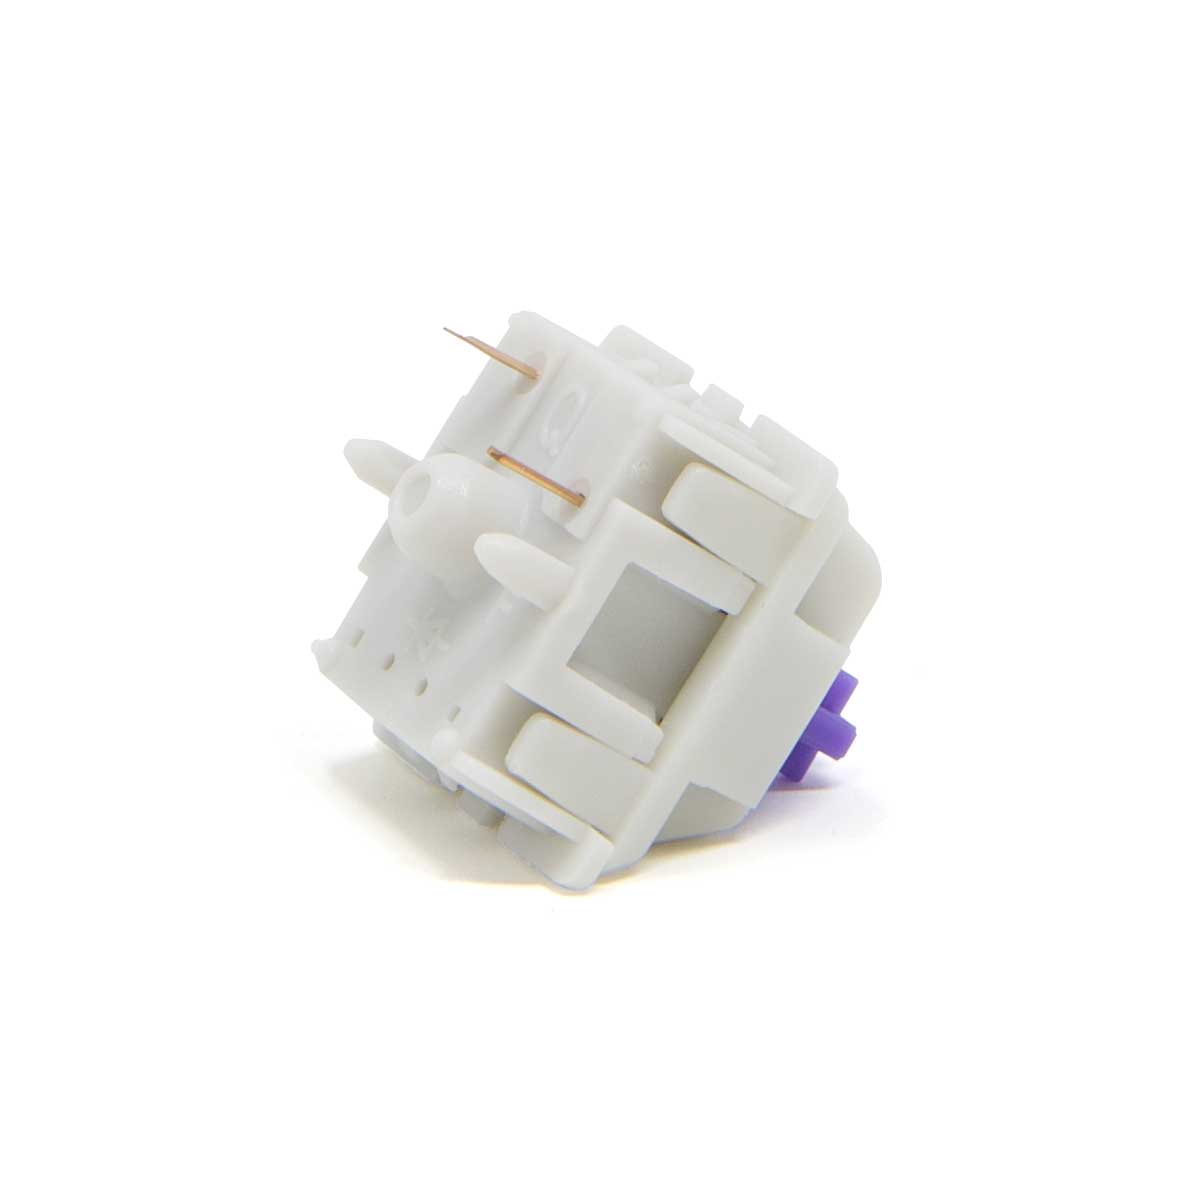 Zeal Zealios V1 Redux Tactile Switches - Divinikey